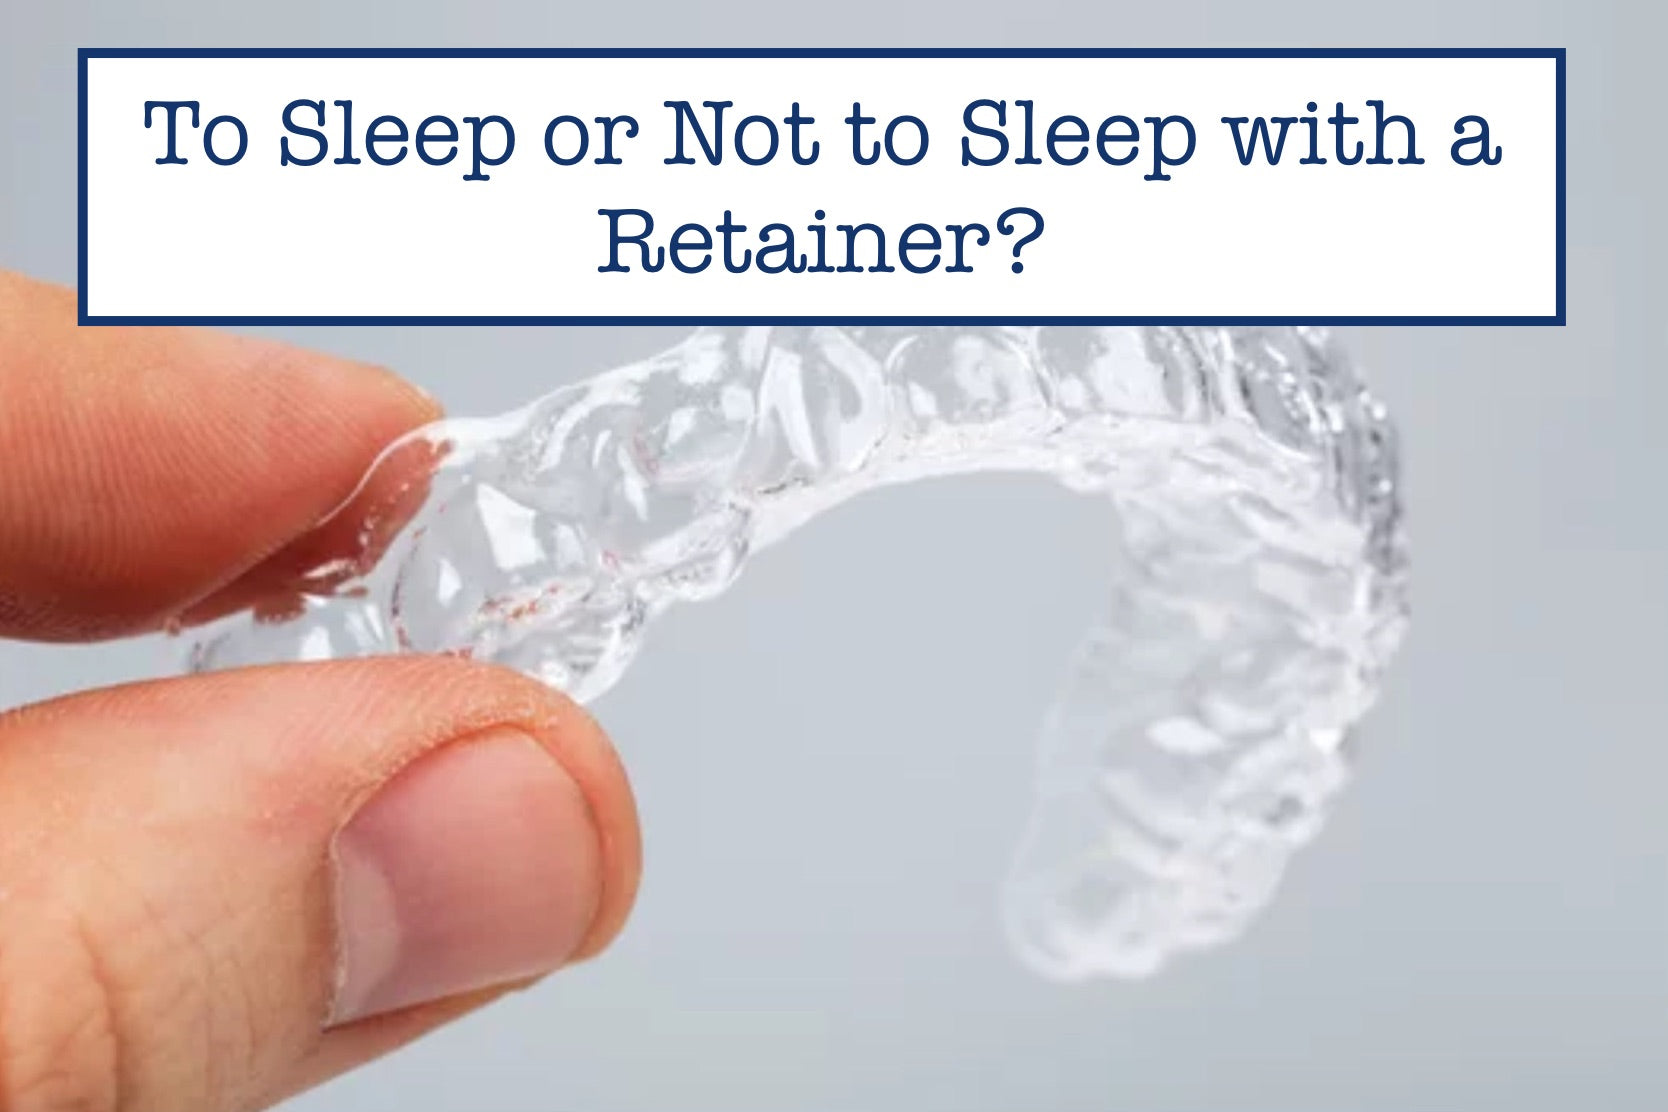 To Sleep or Not to Sleep with a Retainer?